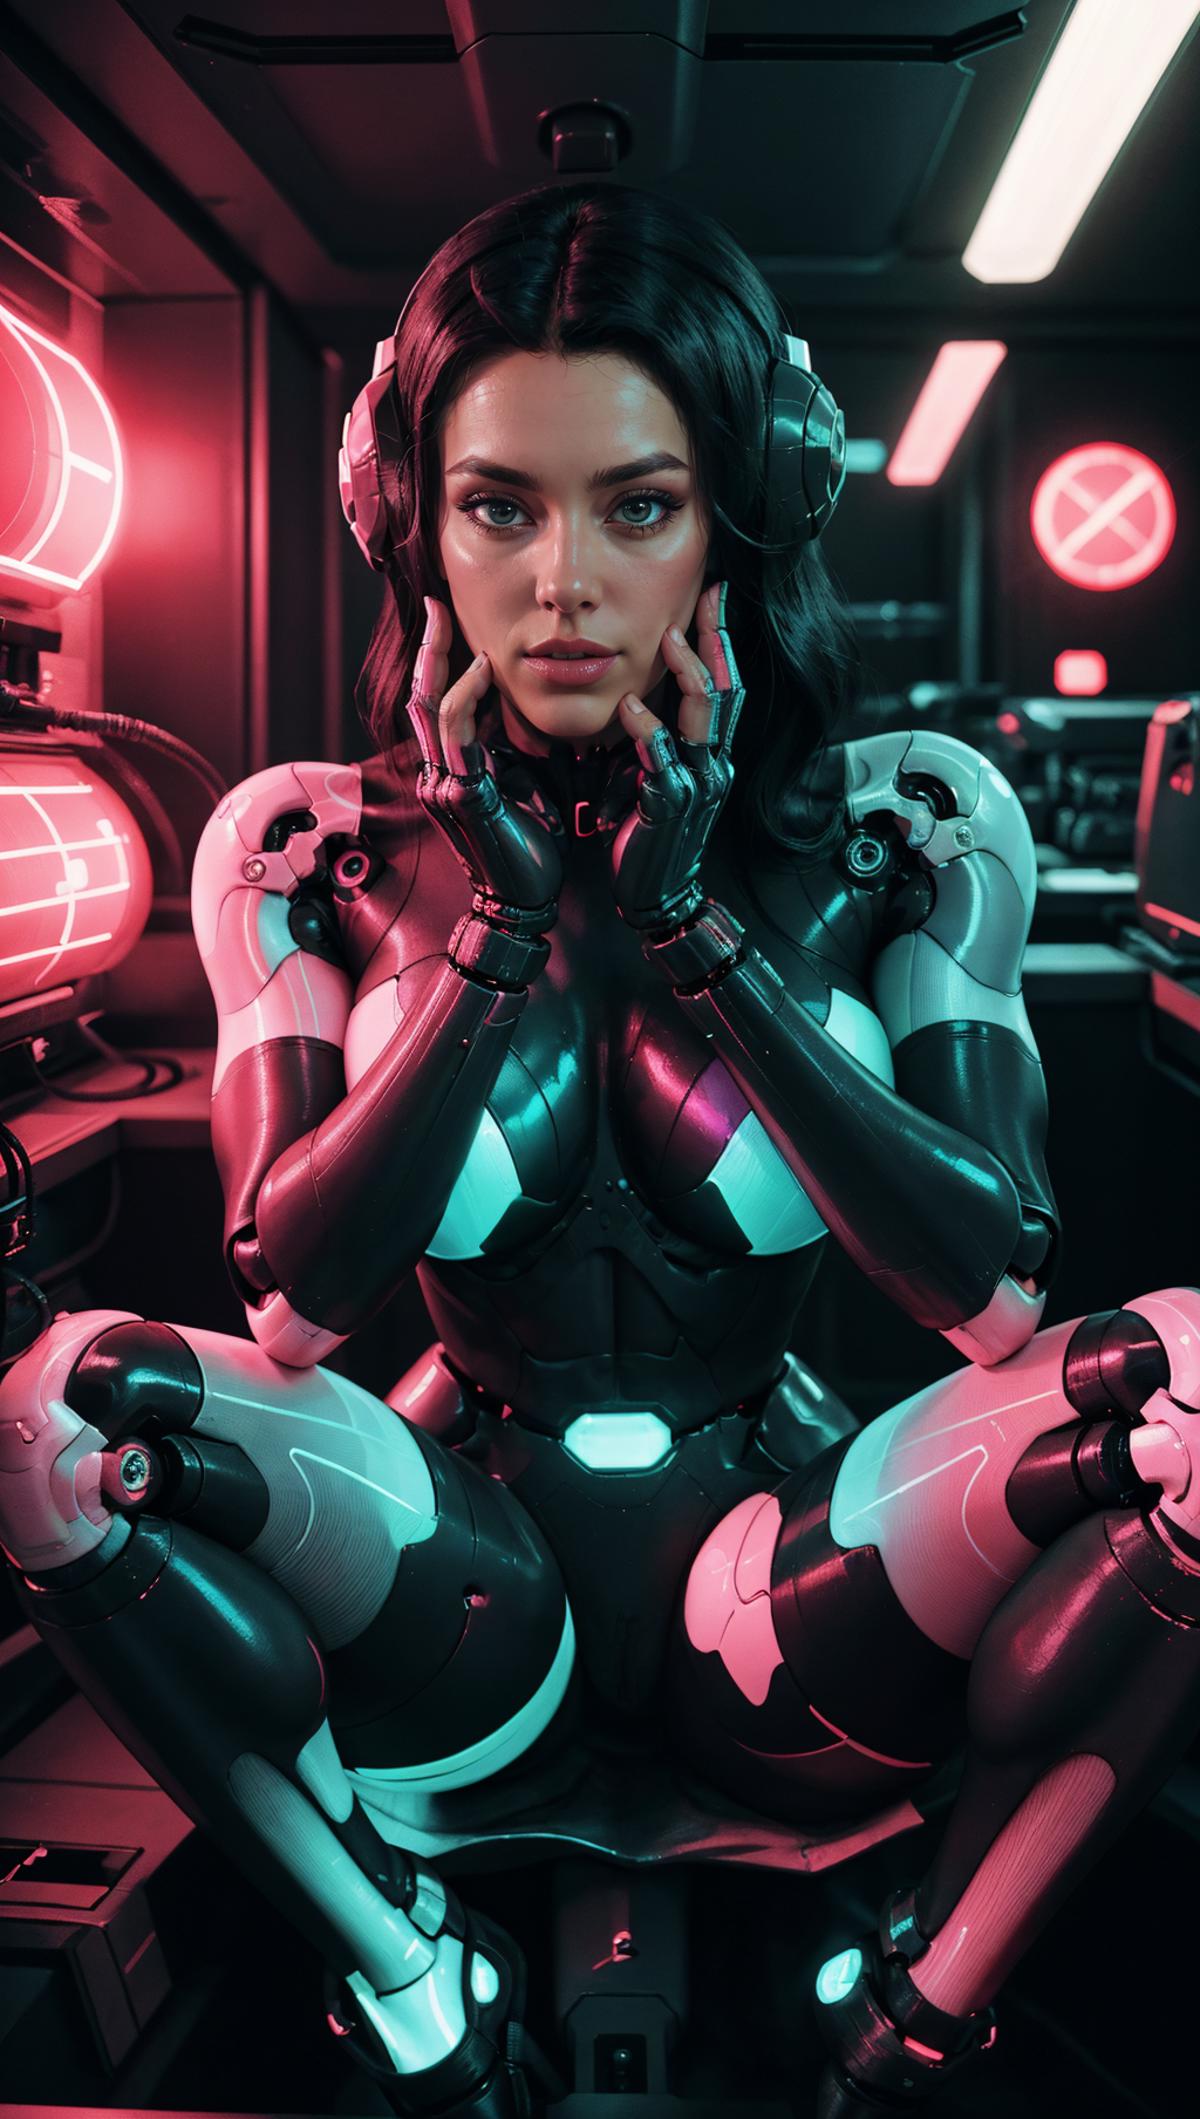 Woman wearing a futuristic costume or cyborg suit.